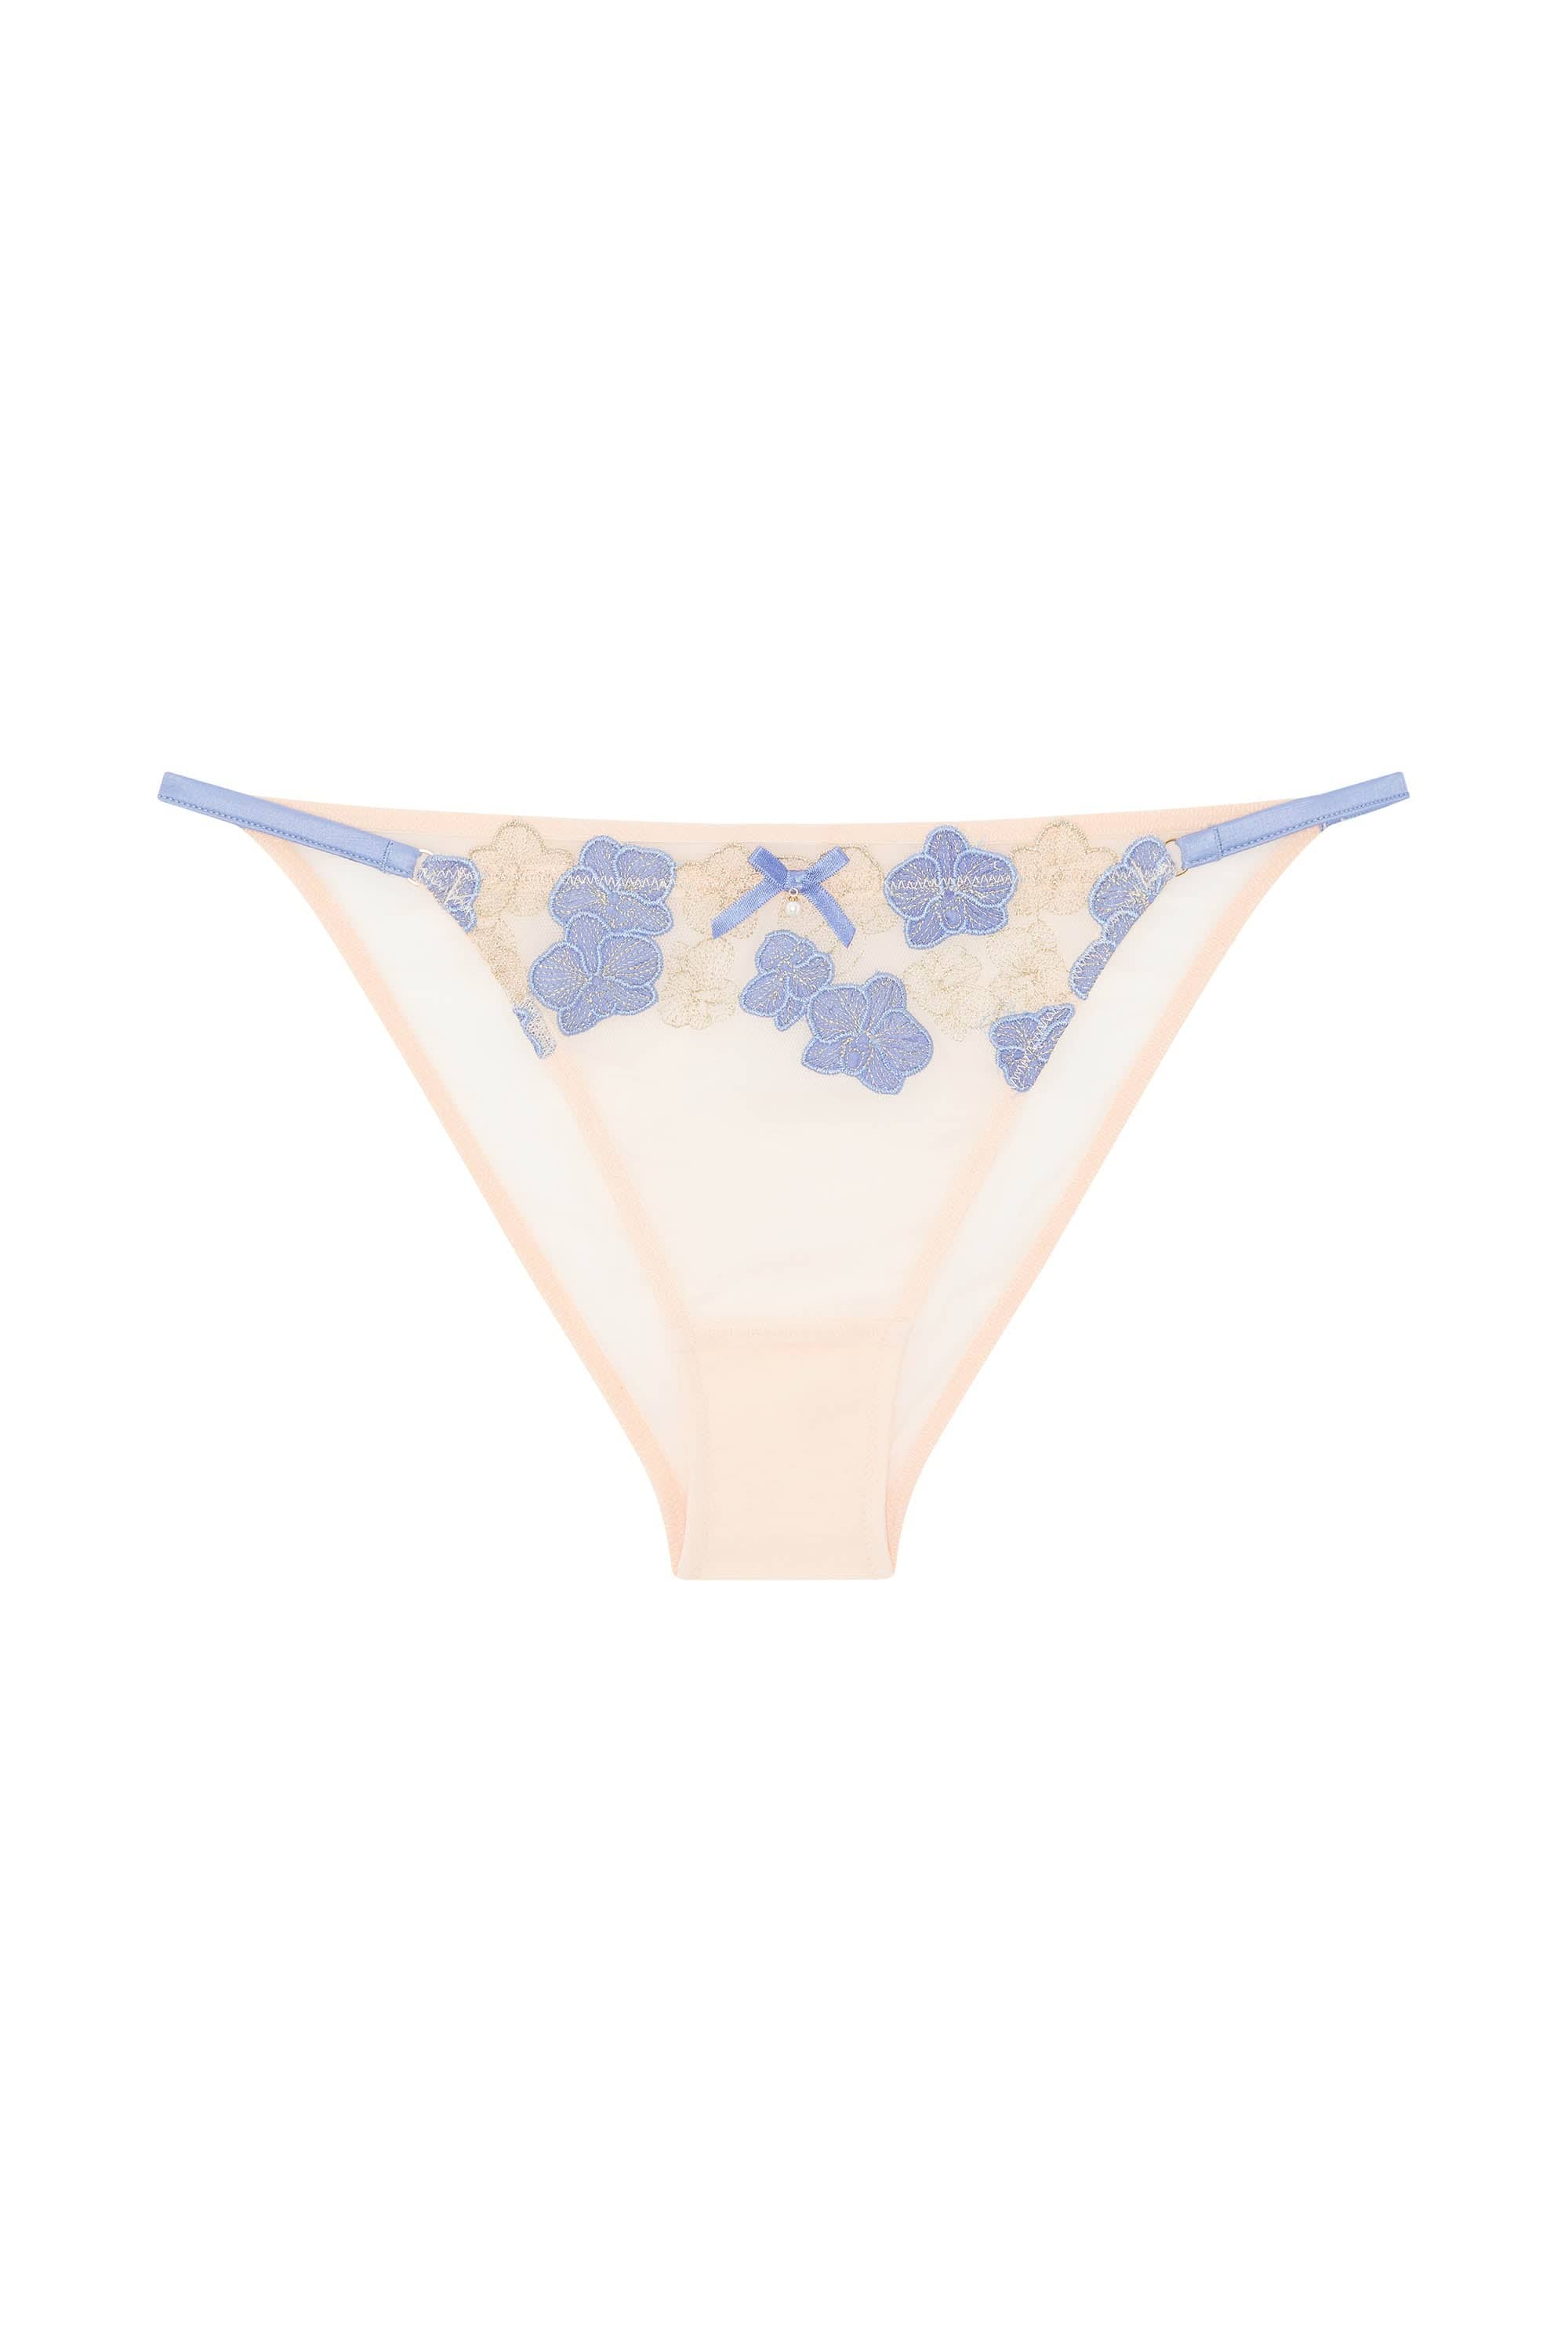 Rayne Gold And Lilac Satin Floral Embroidered Brief